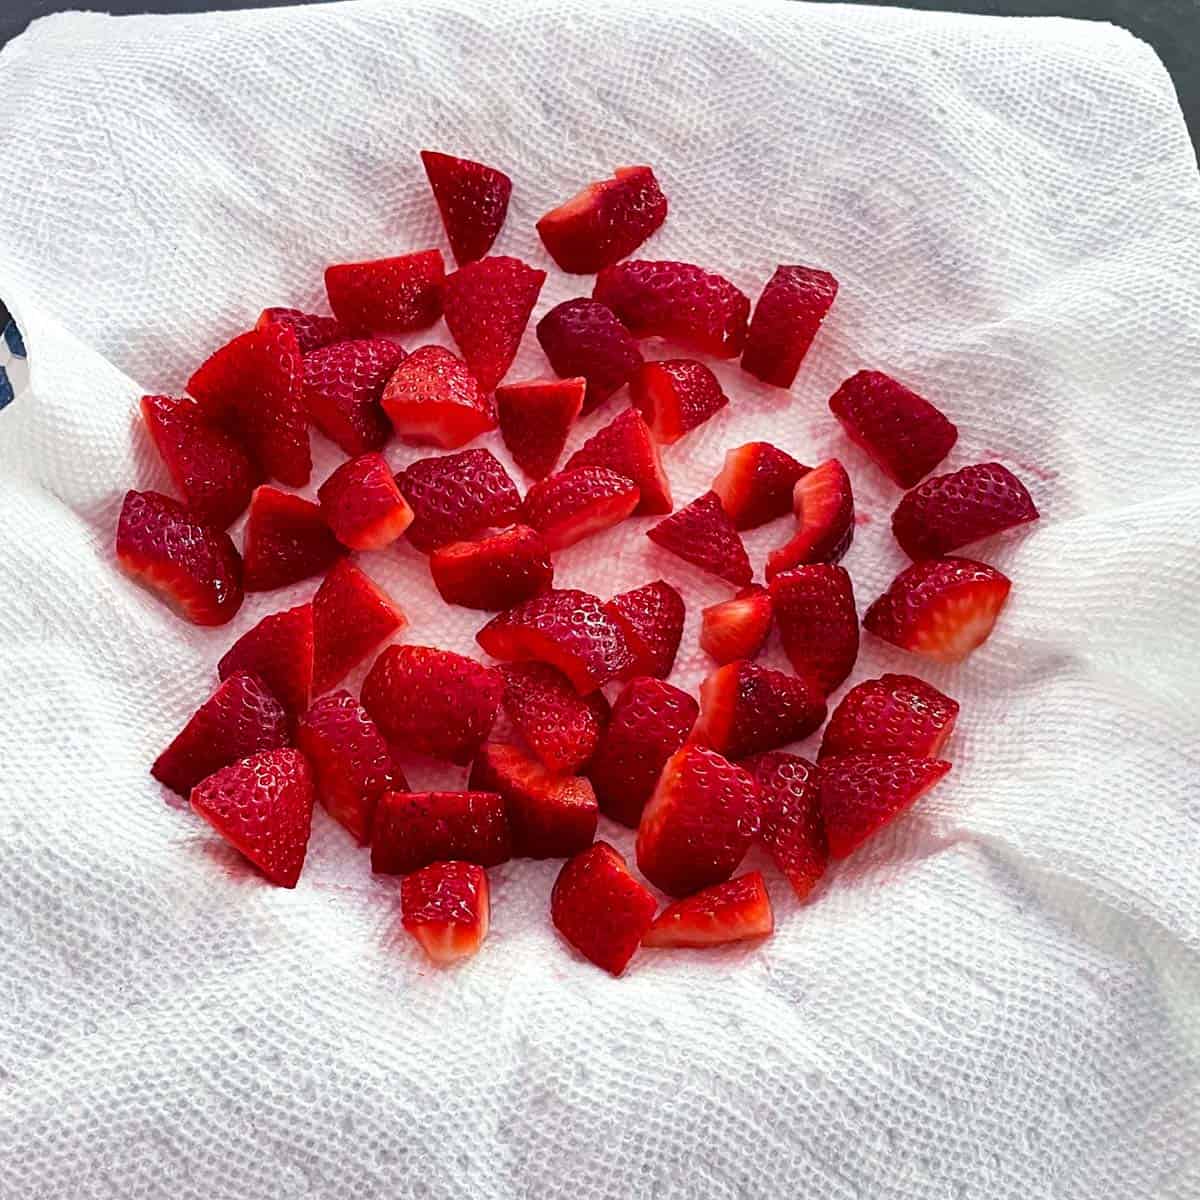 Cut up strawberries with cut side on paper towel to help absorb strawberries liquid.